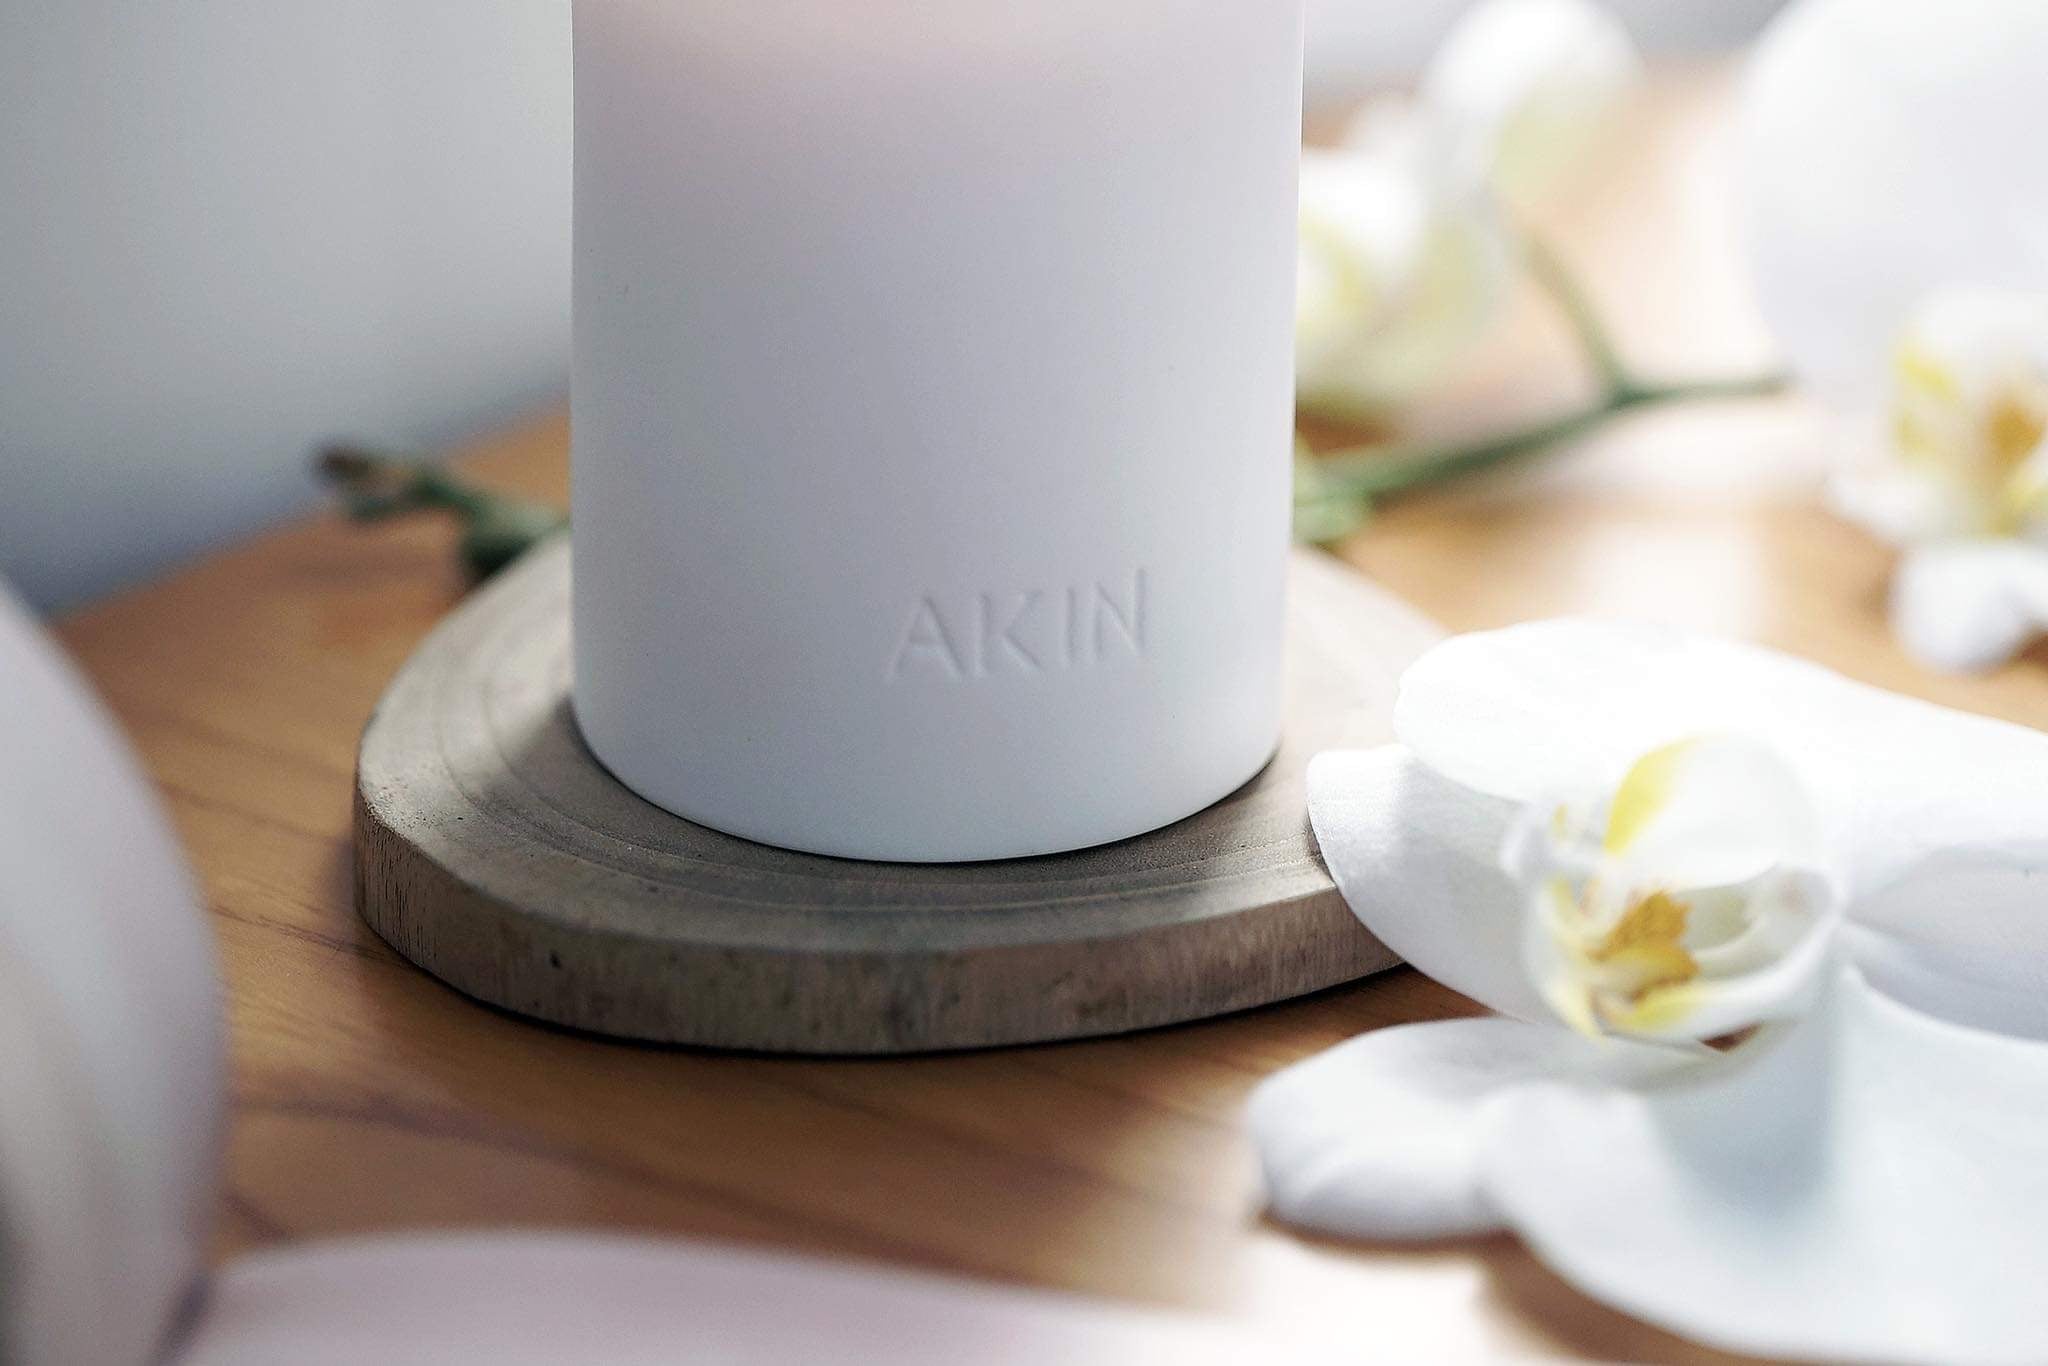 LIMITED HOLIDAY CANDLE by Akin